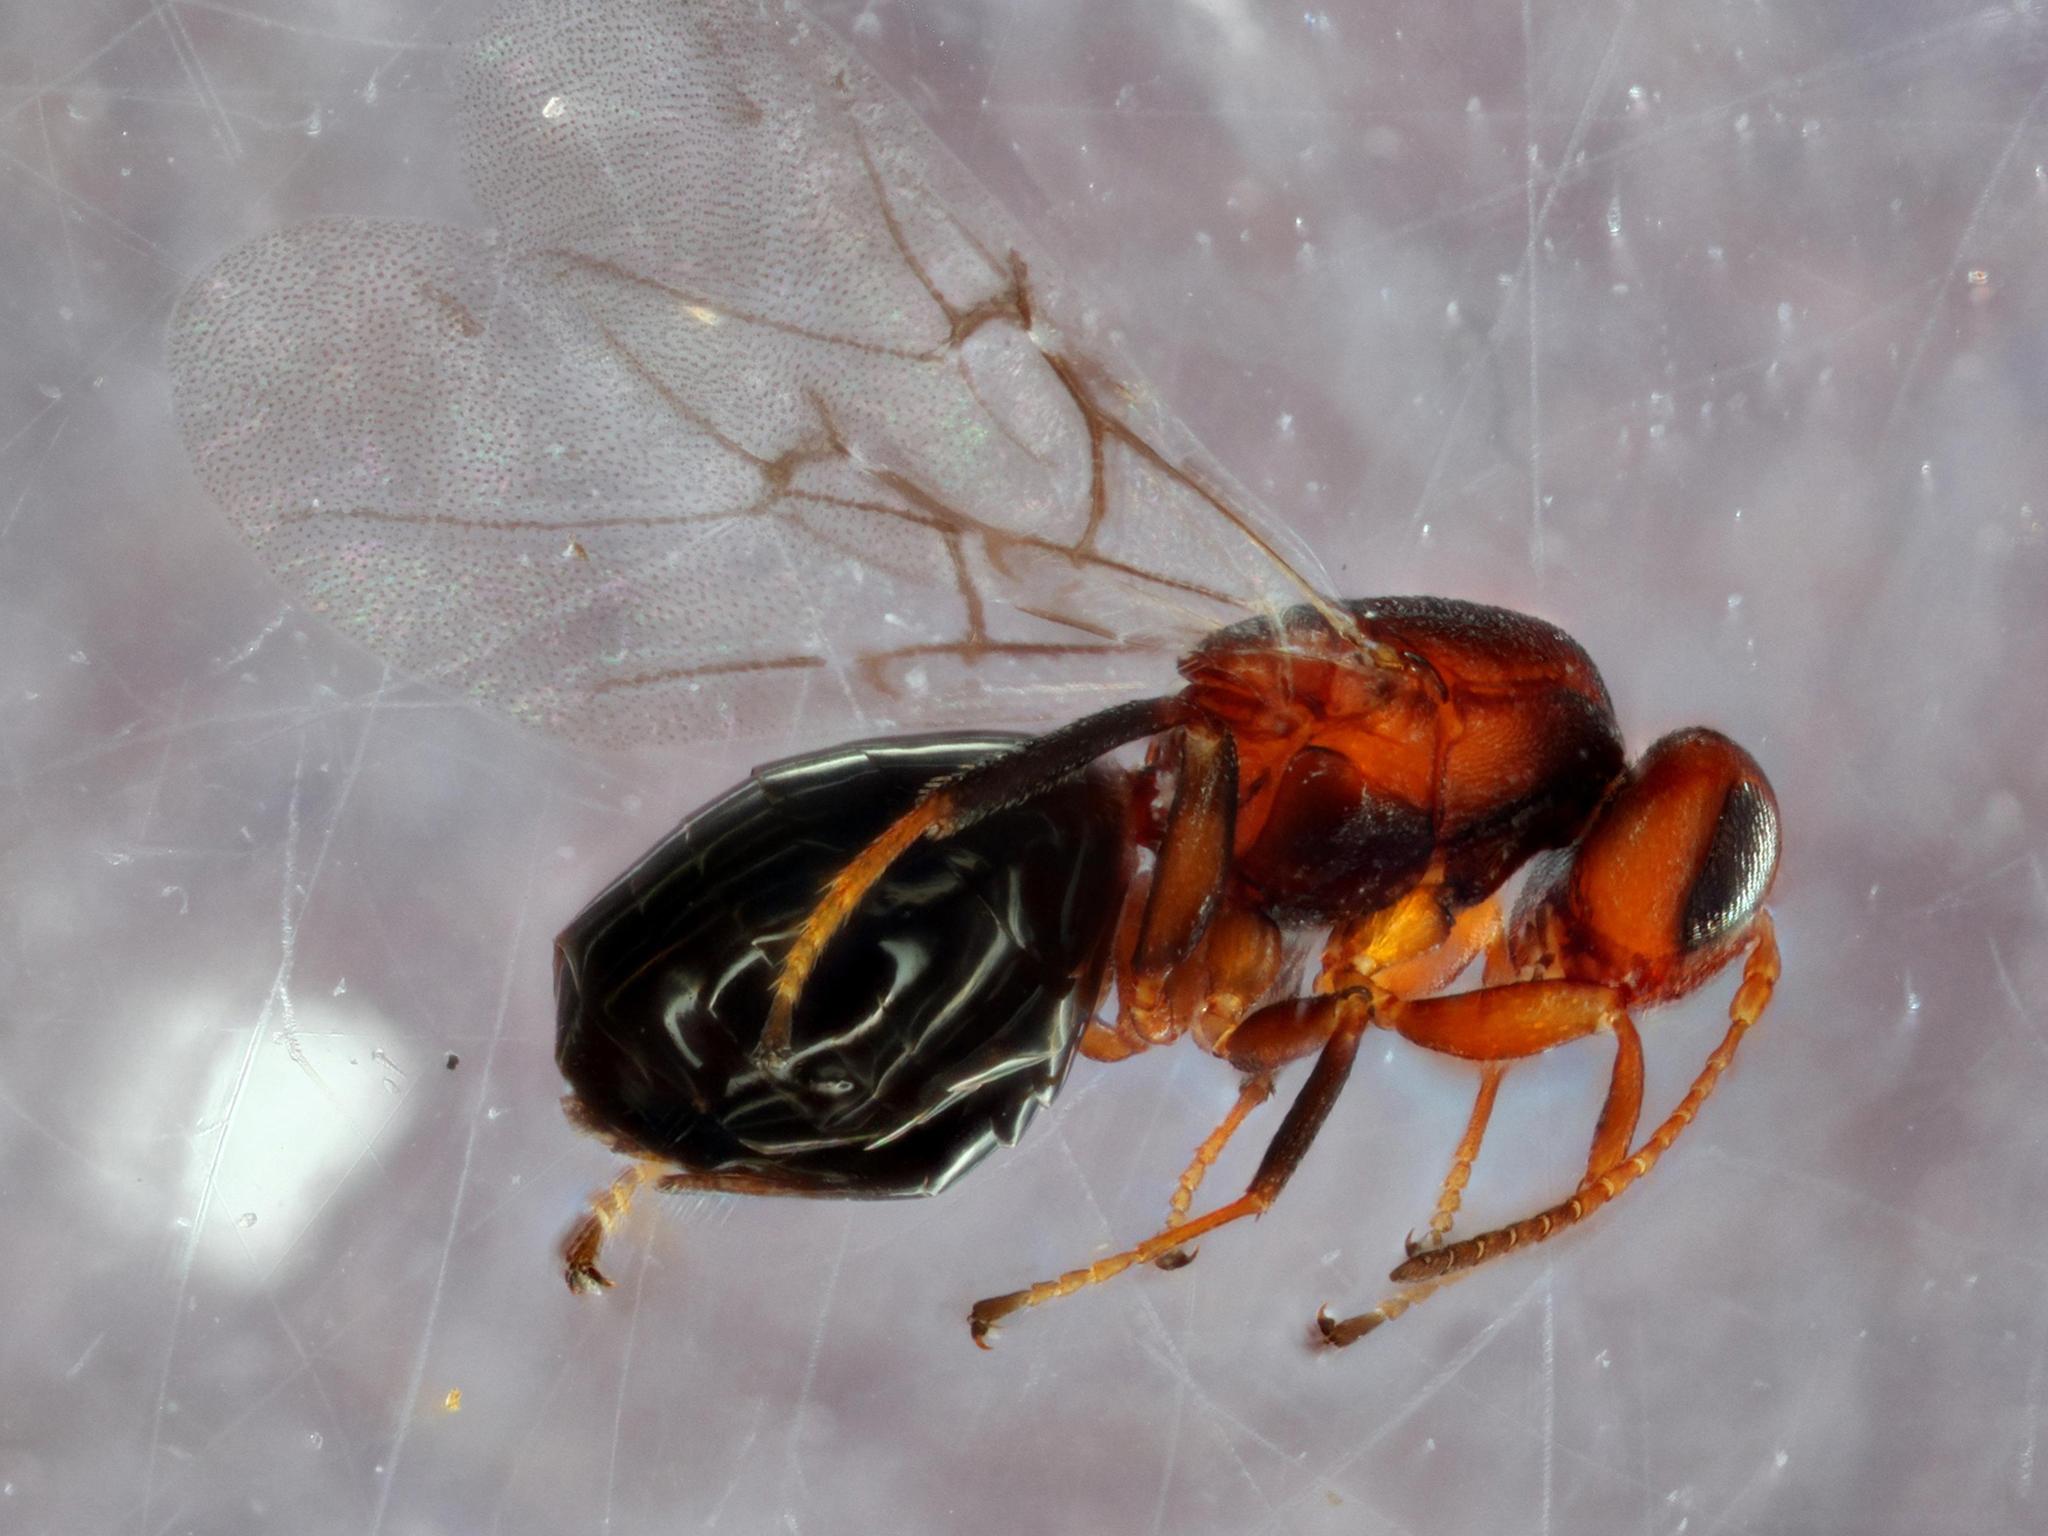 The young of the oak gall wasp are parasites’ parasites